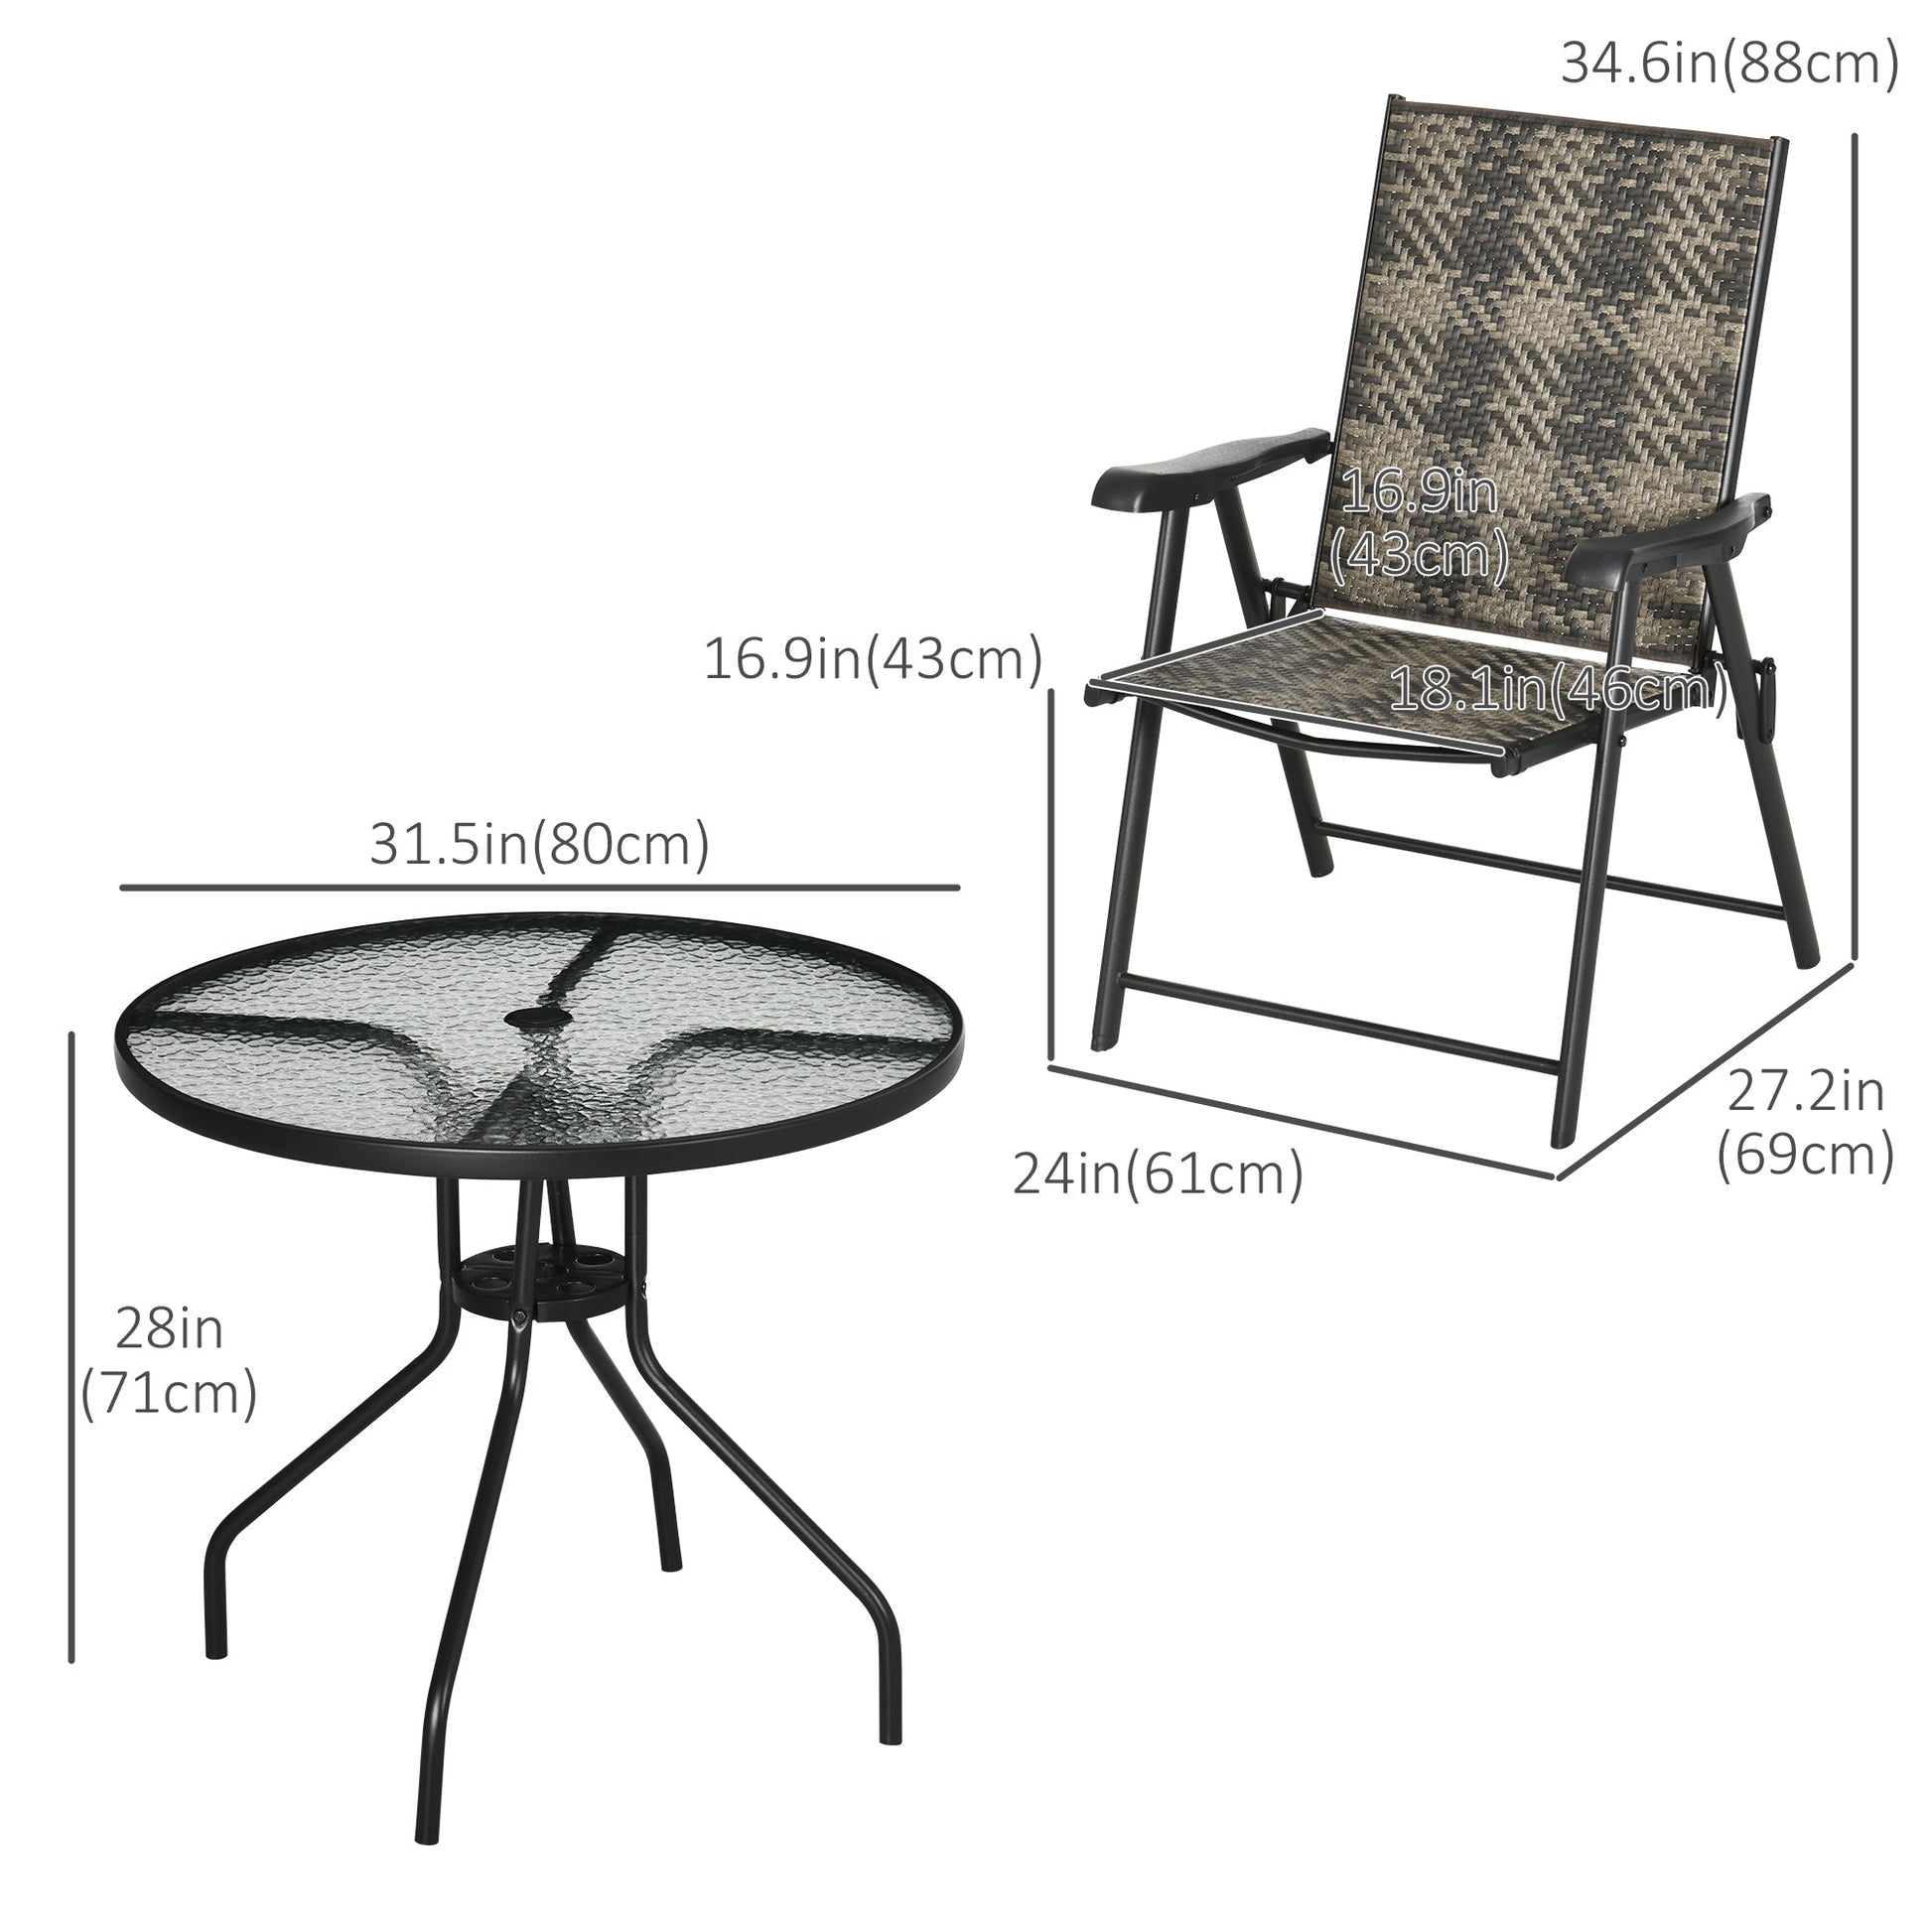 5 Pieces Wicker Patio Dining Set, Φ31.5" Round Glass Top Garden Dining Table with Umbrella Hole, Outdoor PE Rattan Folding Armchair for Outdoors, Camping, Mixed Gray - Gallery Canada